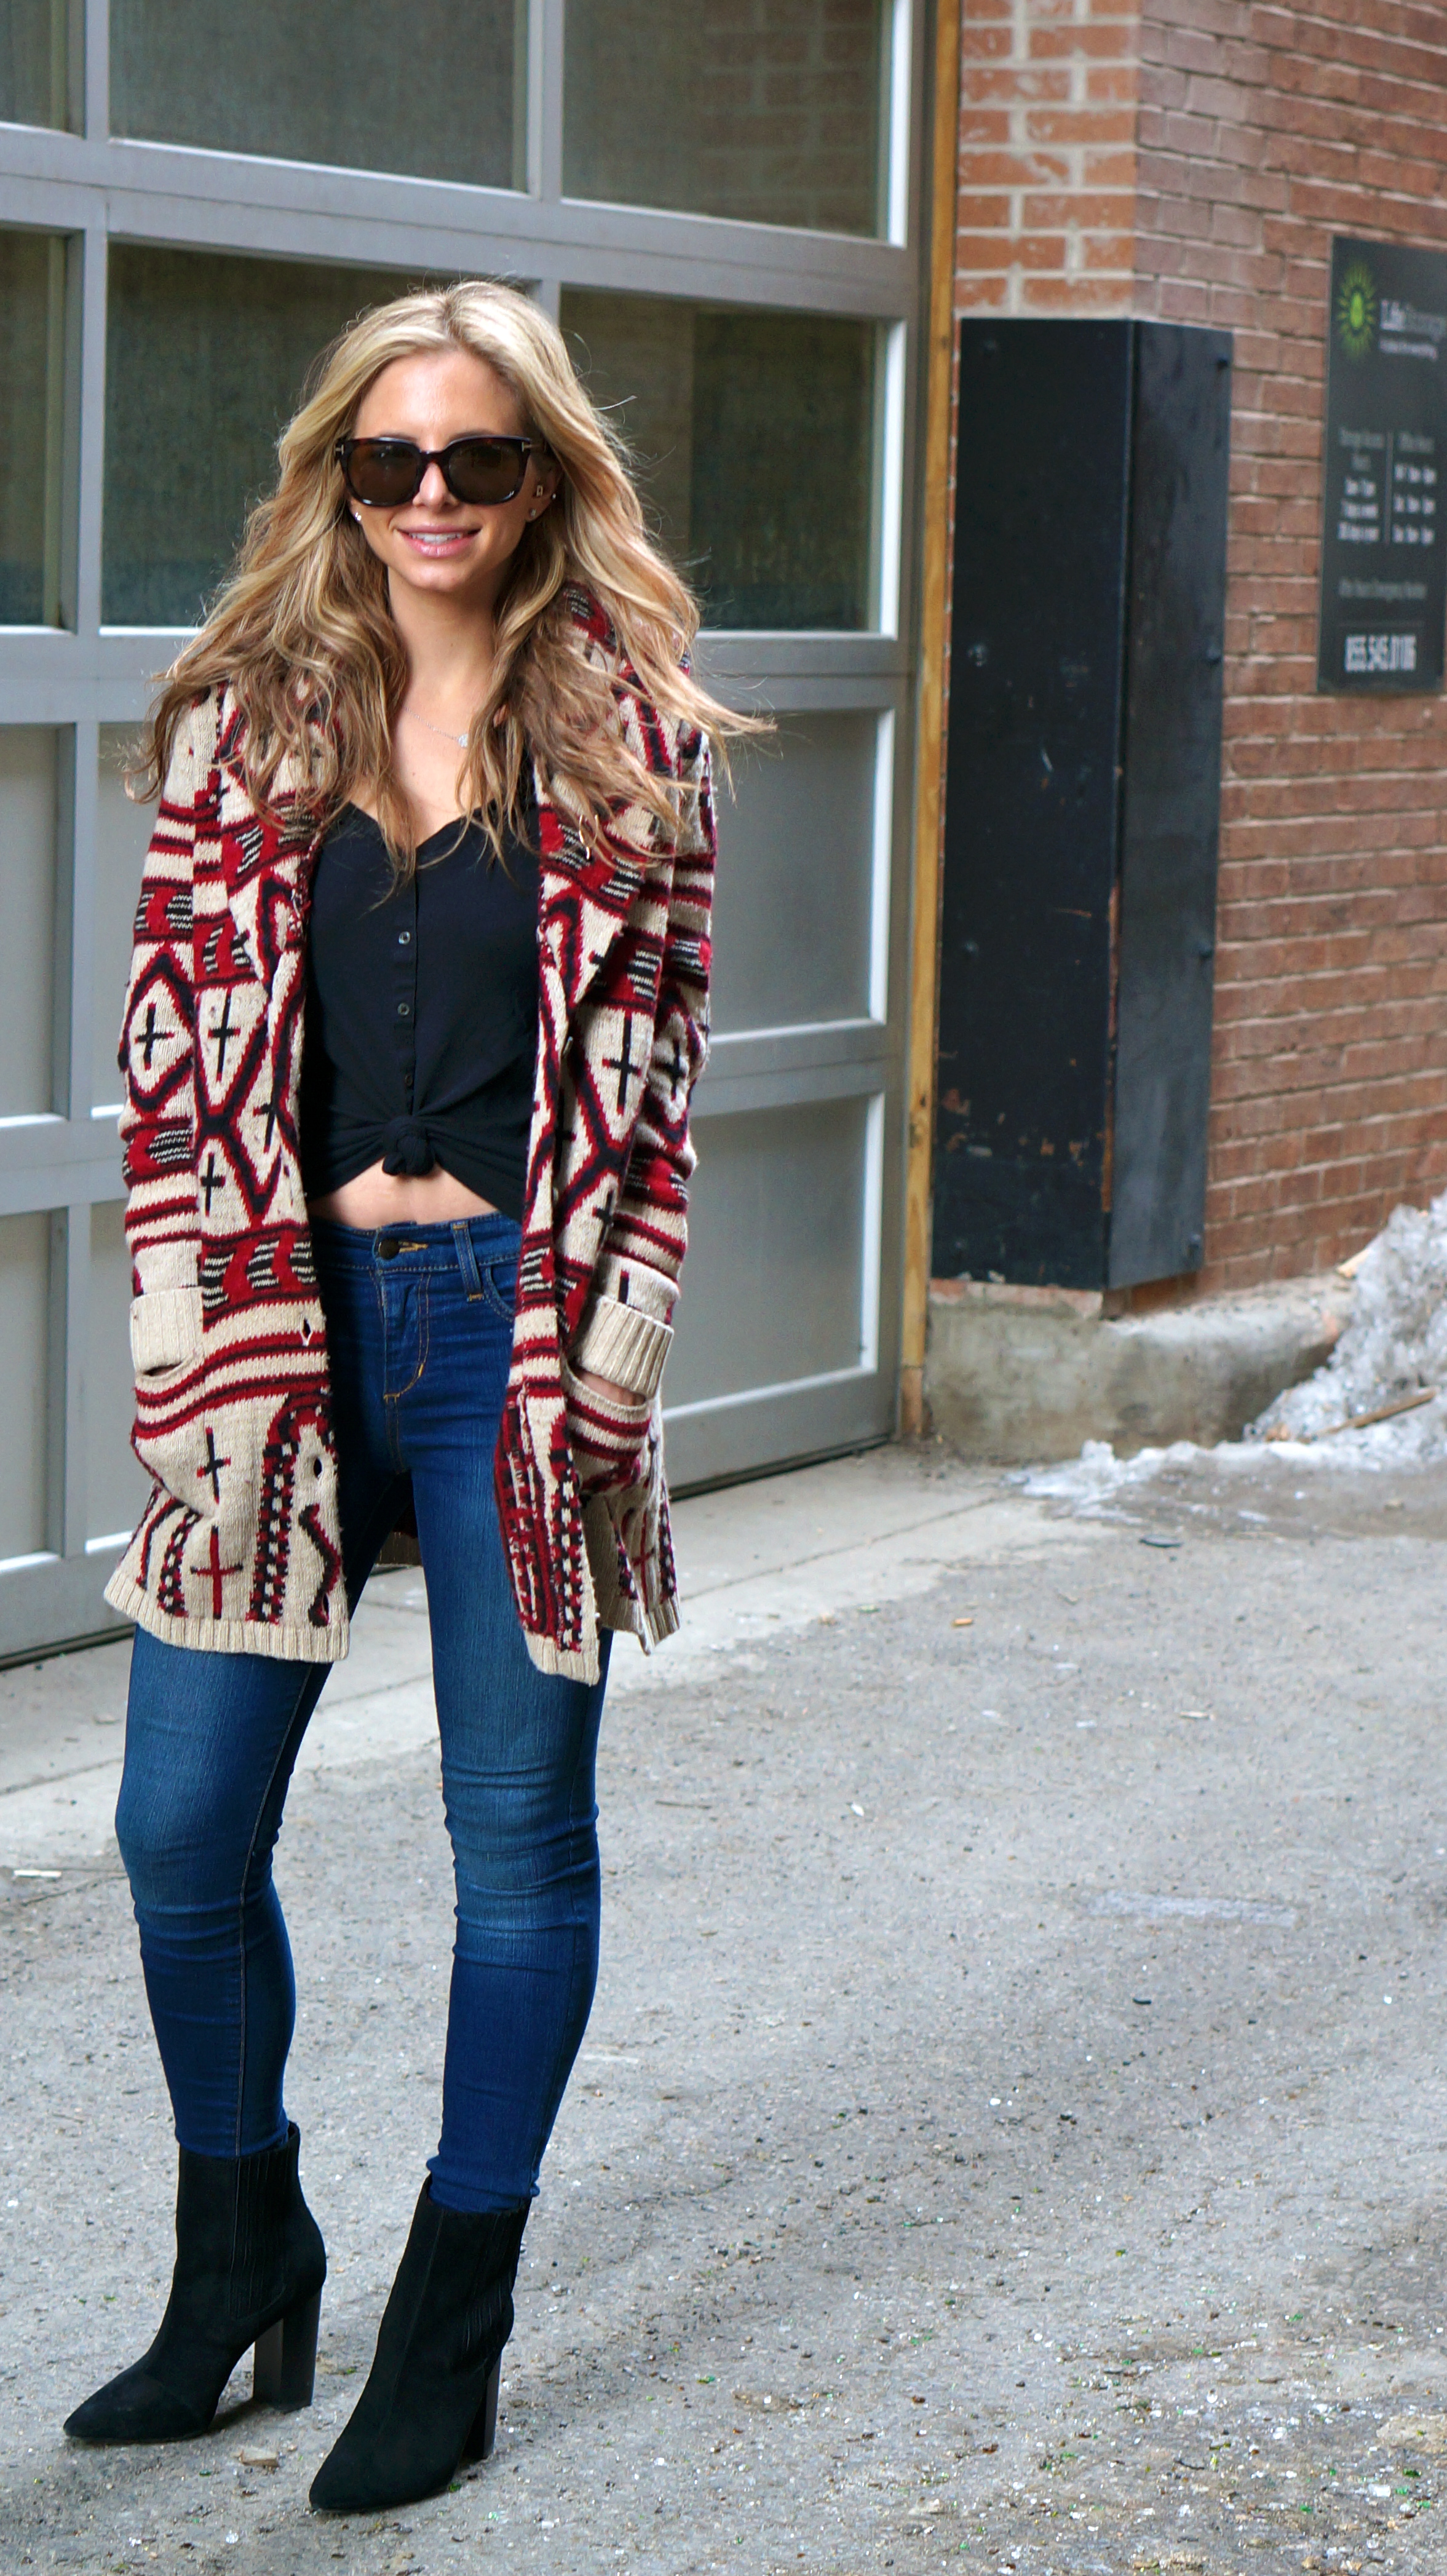 Perfectly Printed Cardigan and Suede Booties